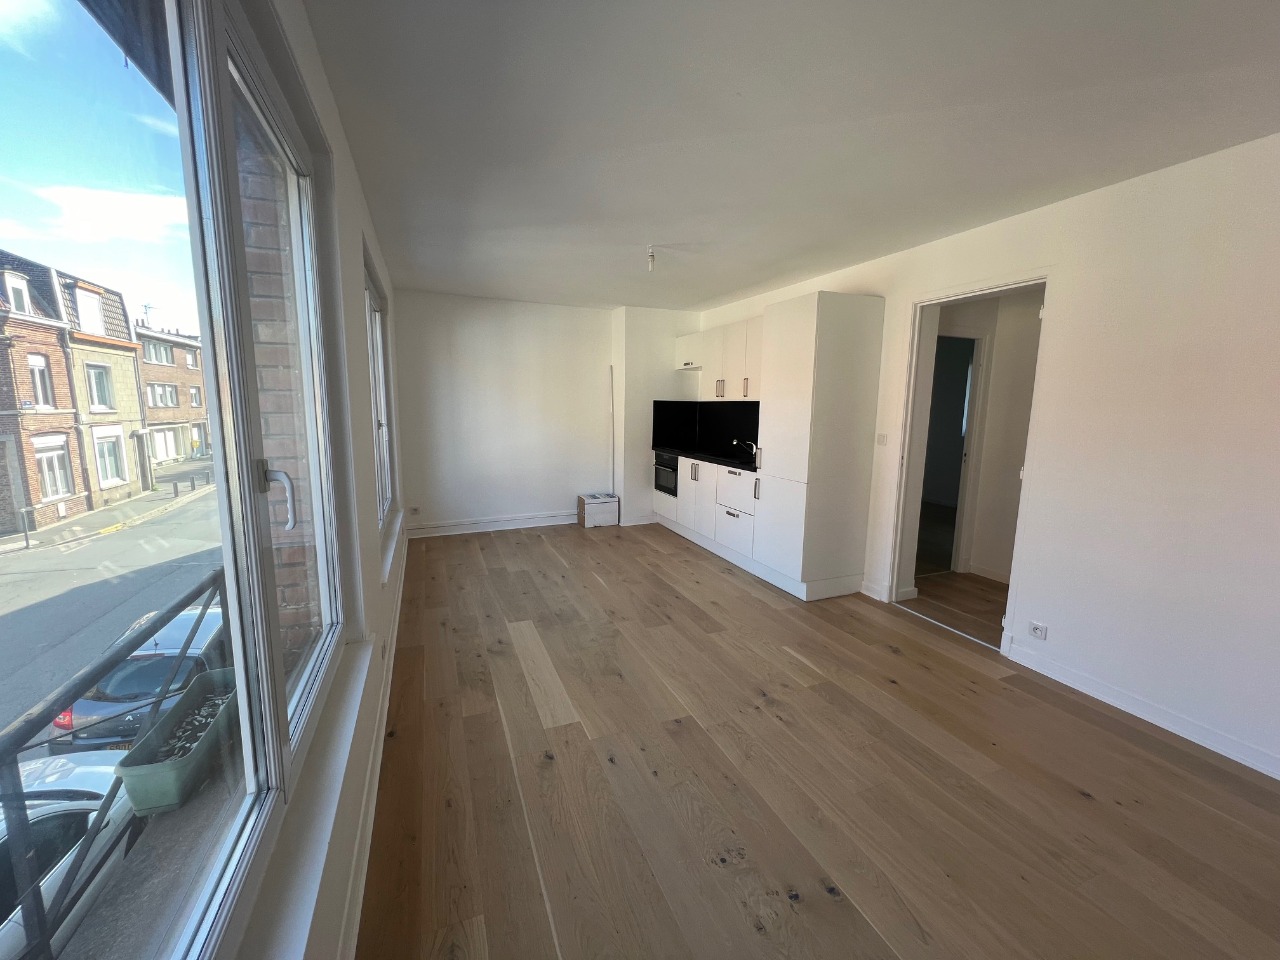 T2 renove Photo 1 - JLW Immobilier